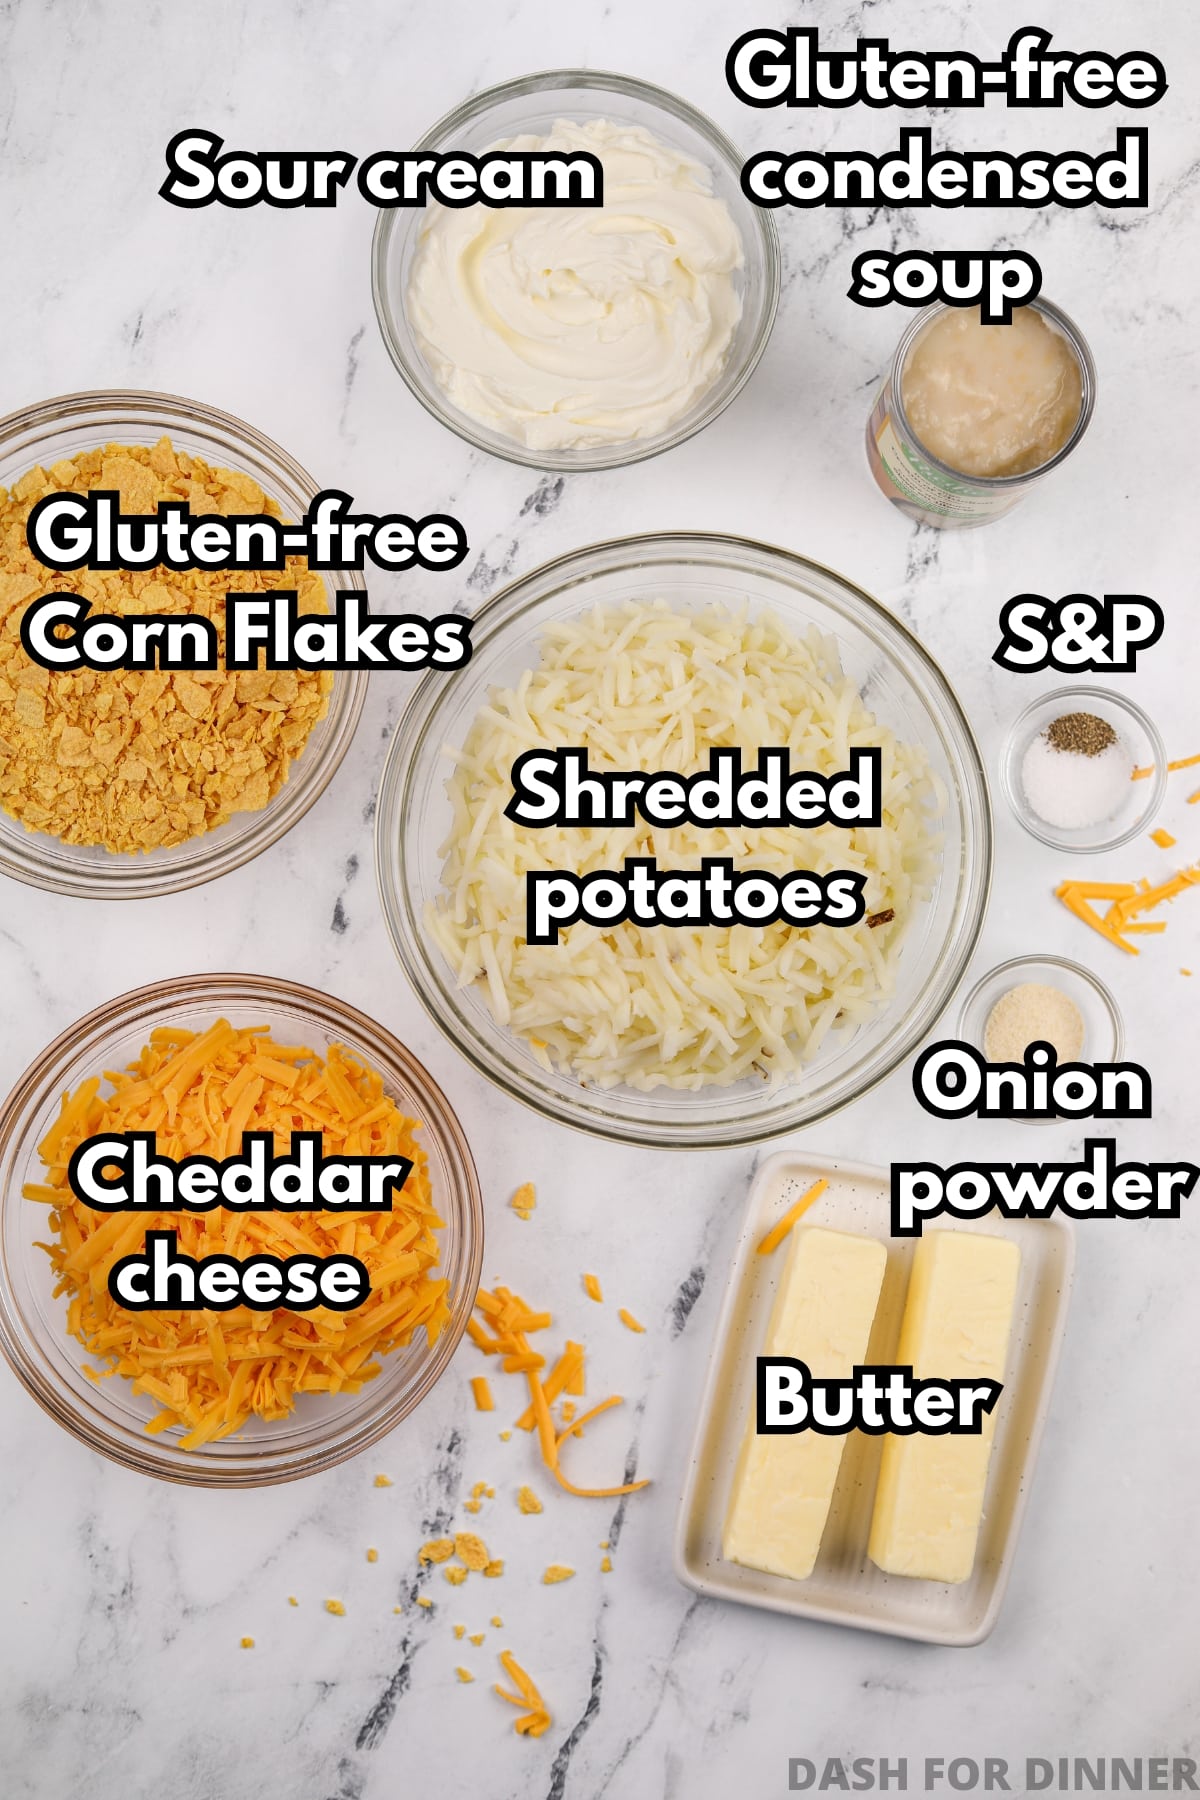 The ingredients needed to make funeral potatoes: shredded potatoes, cheddar cheese, butter, corn flakes, etc.